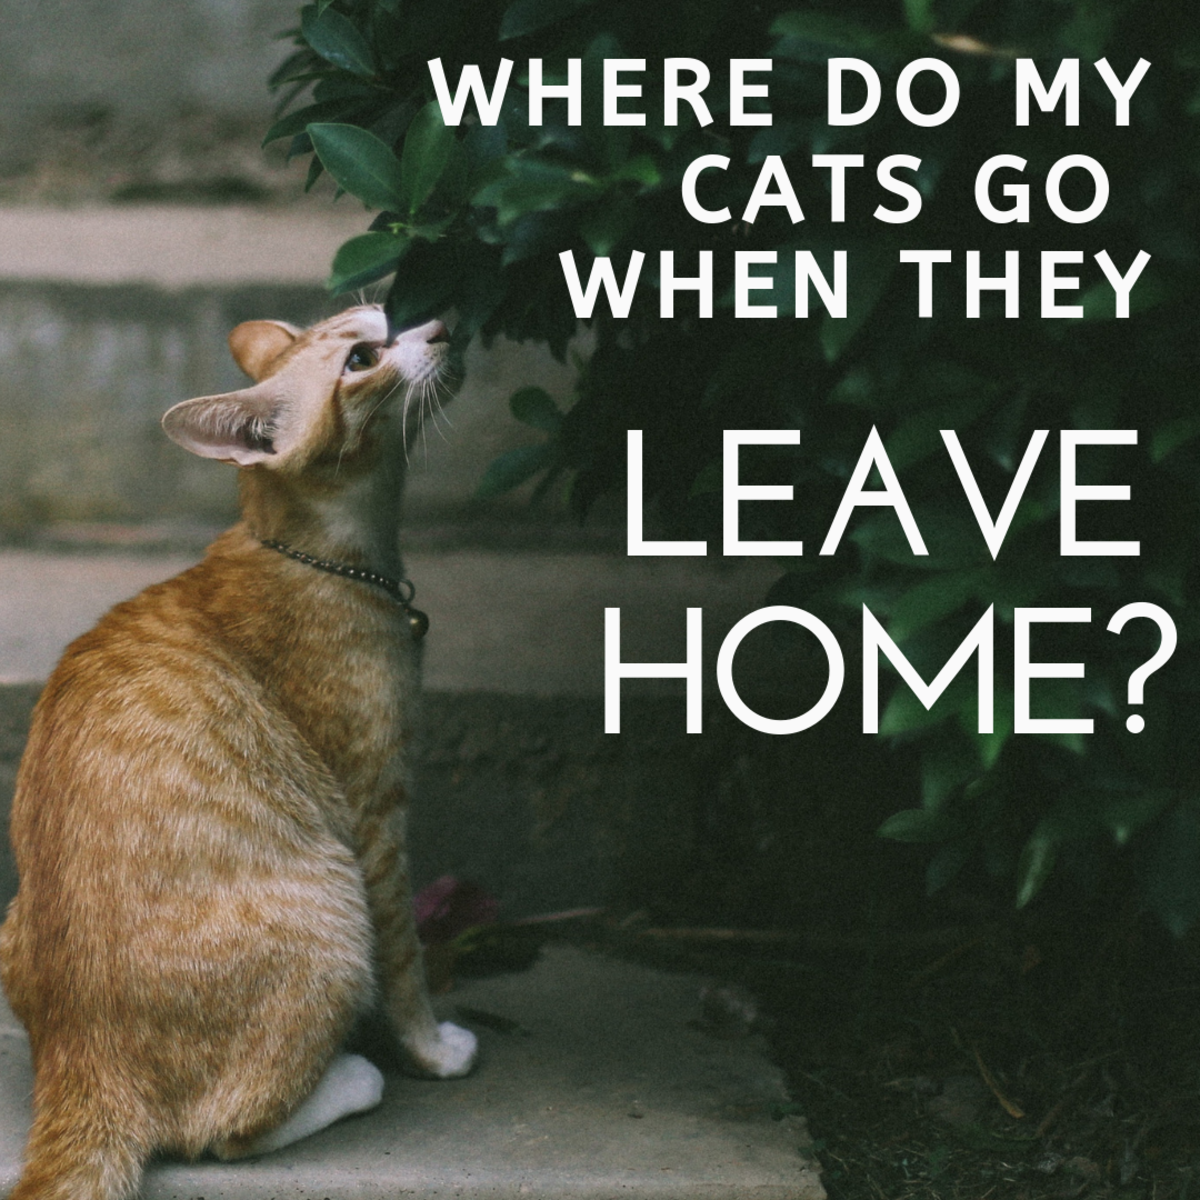 Where Do Your Cats Go When They Leave Your Home?